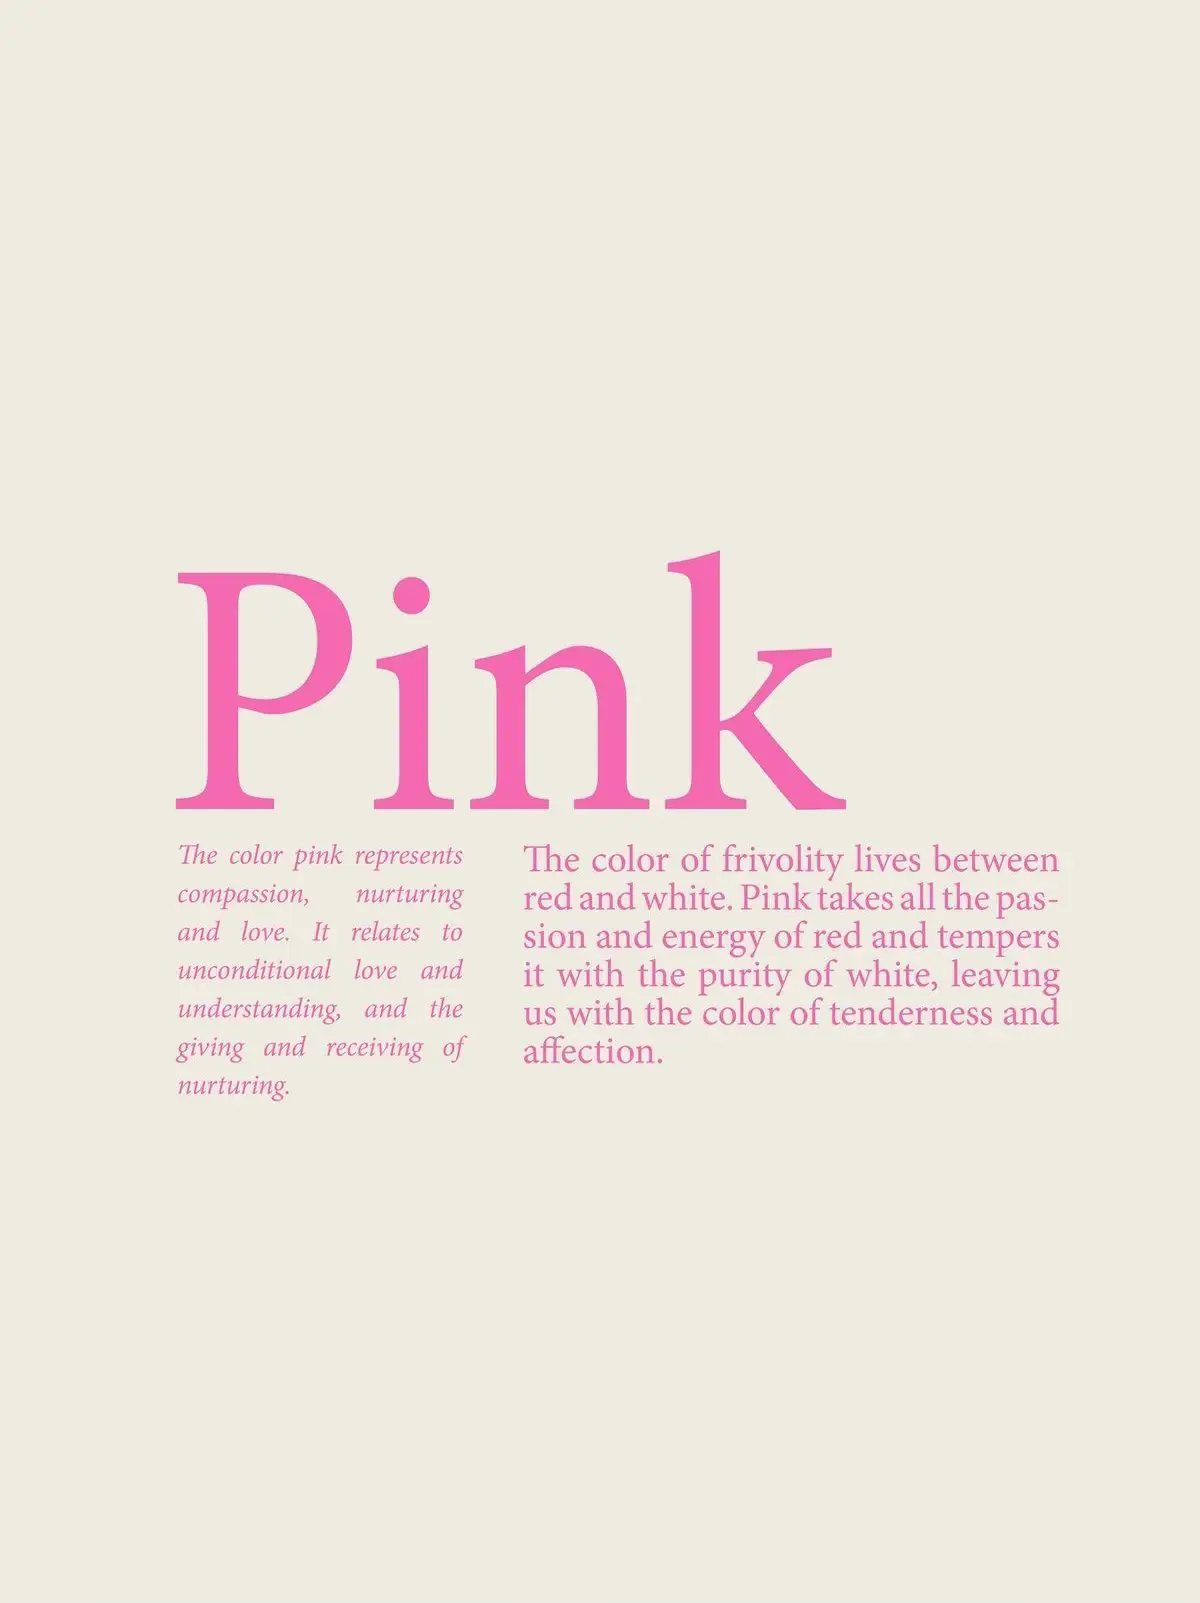 Pink As The Color of Confidence and Happiness - Lemon8 Search